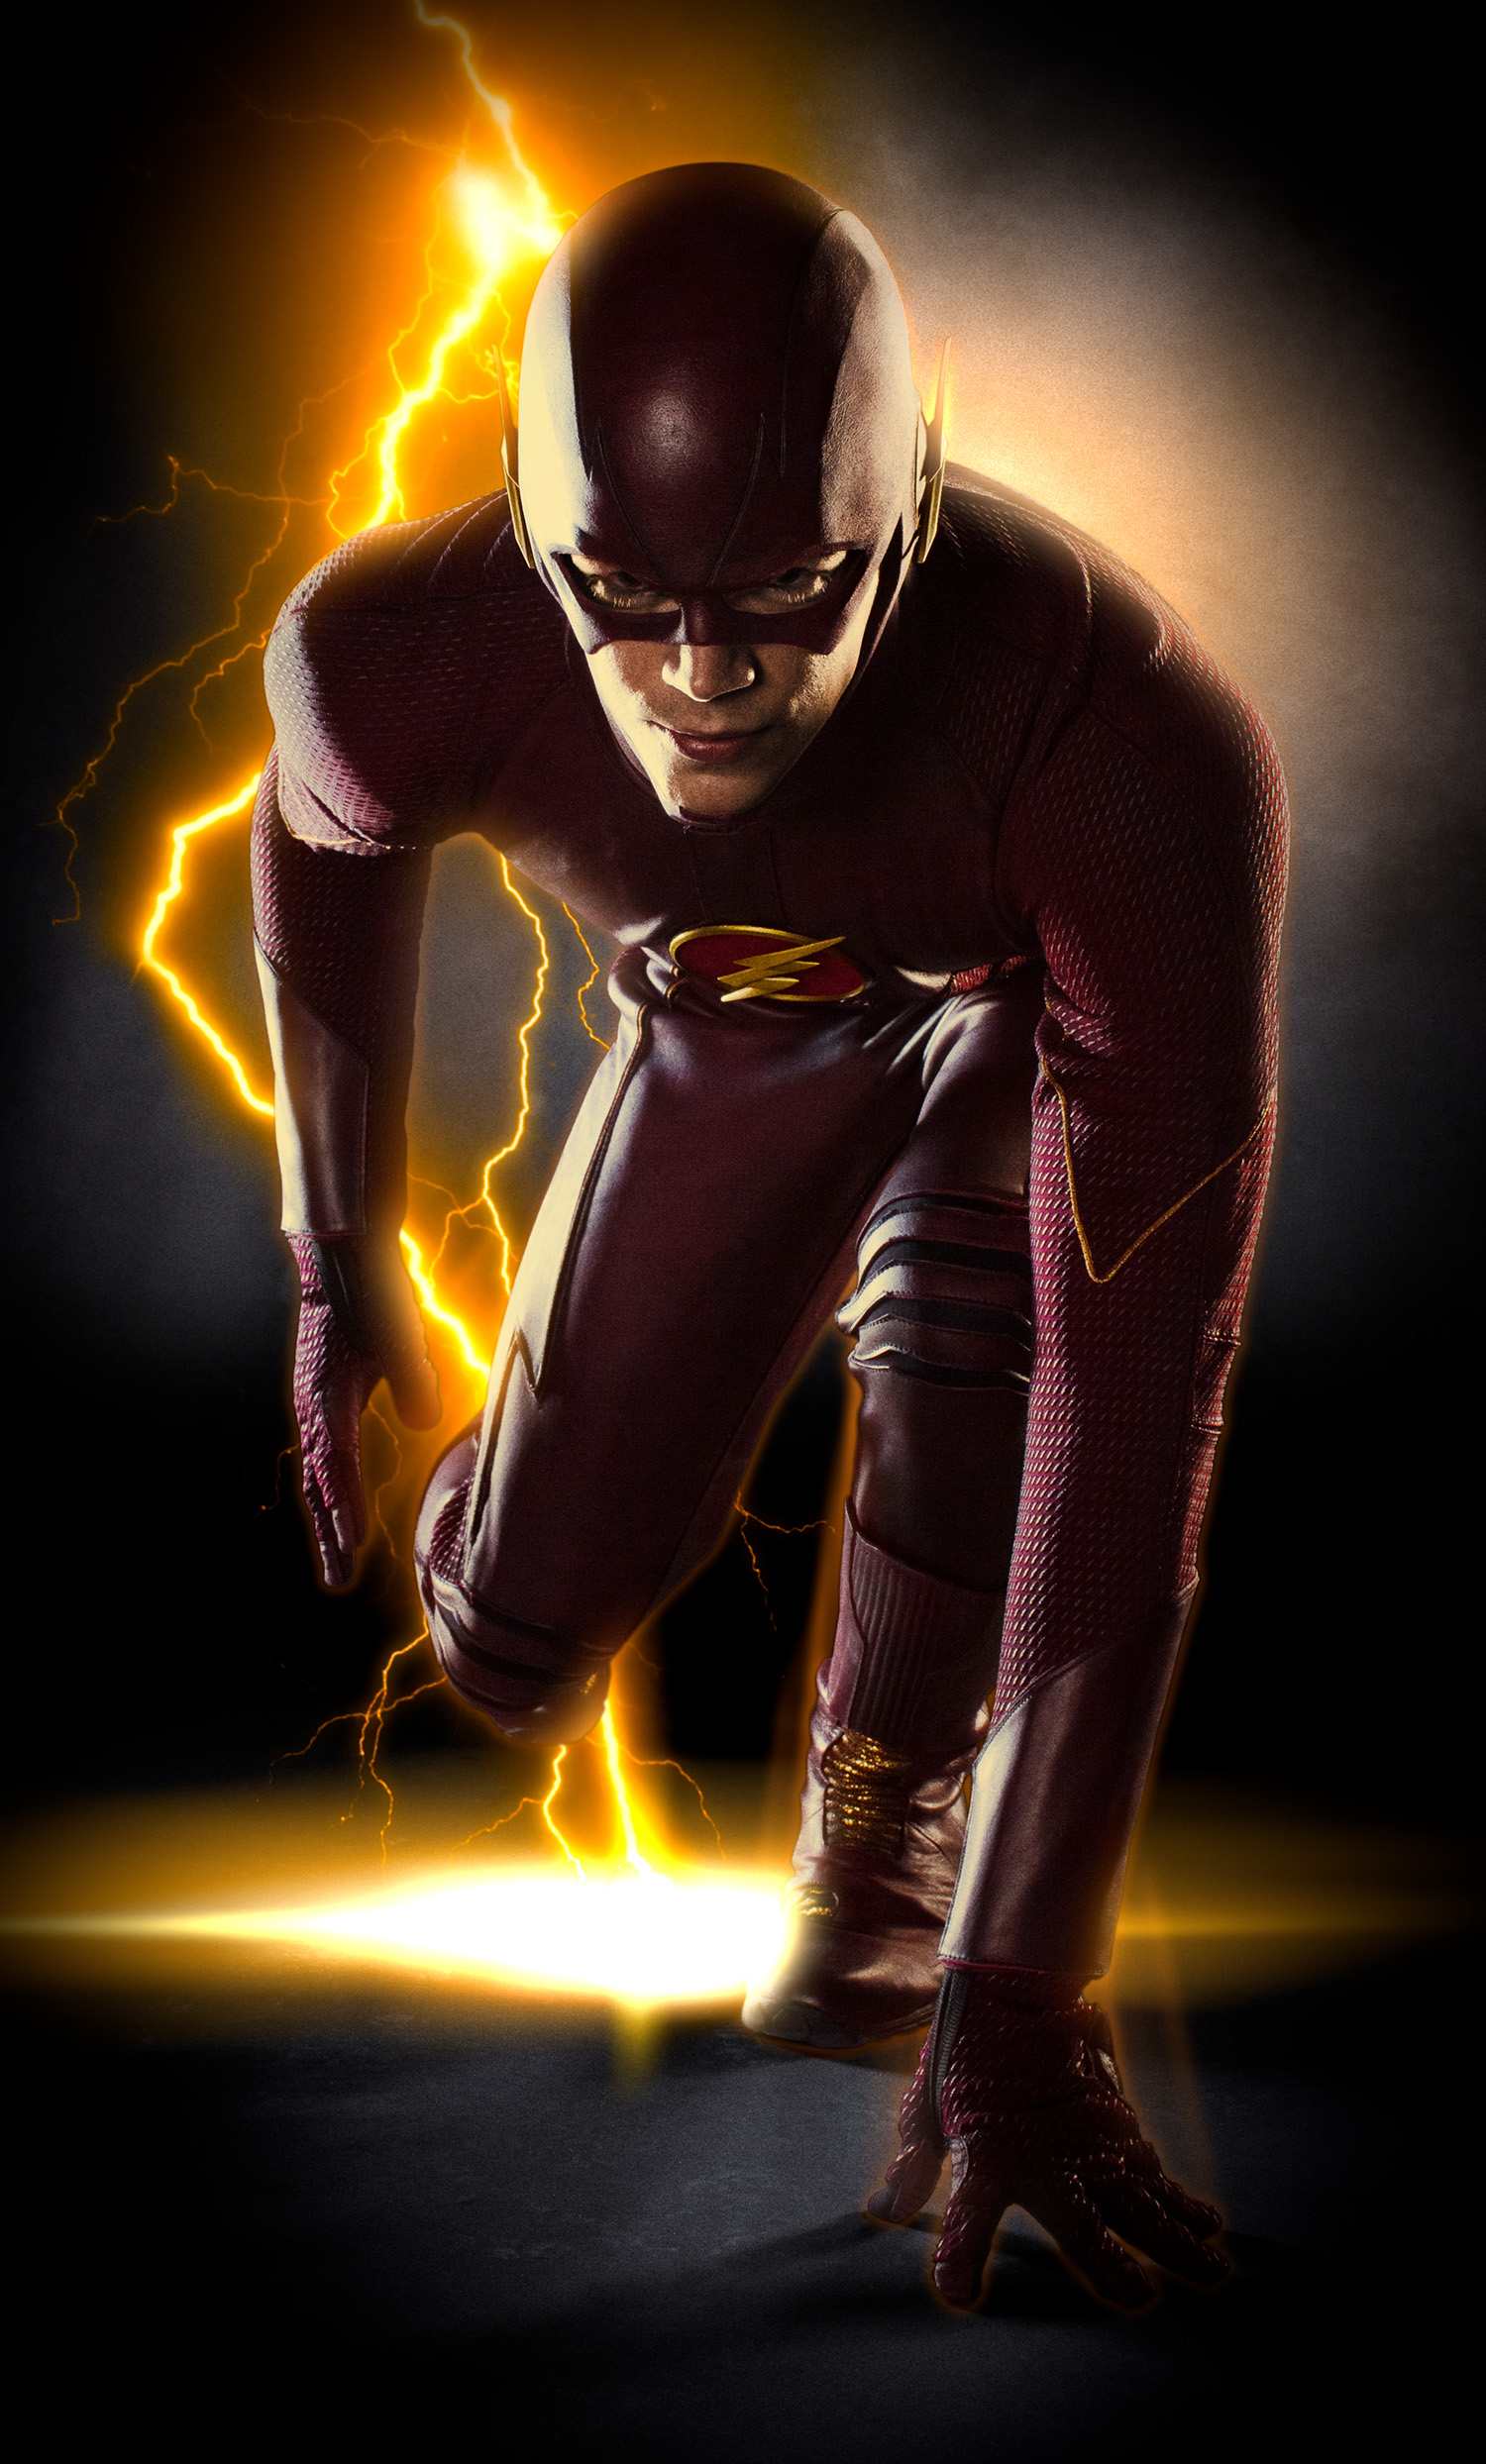 THE FLASH Full Suit Image 570x945 The Flash TV Series Official Costume